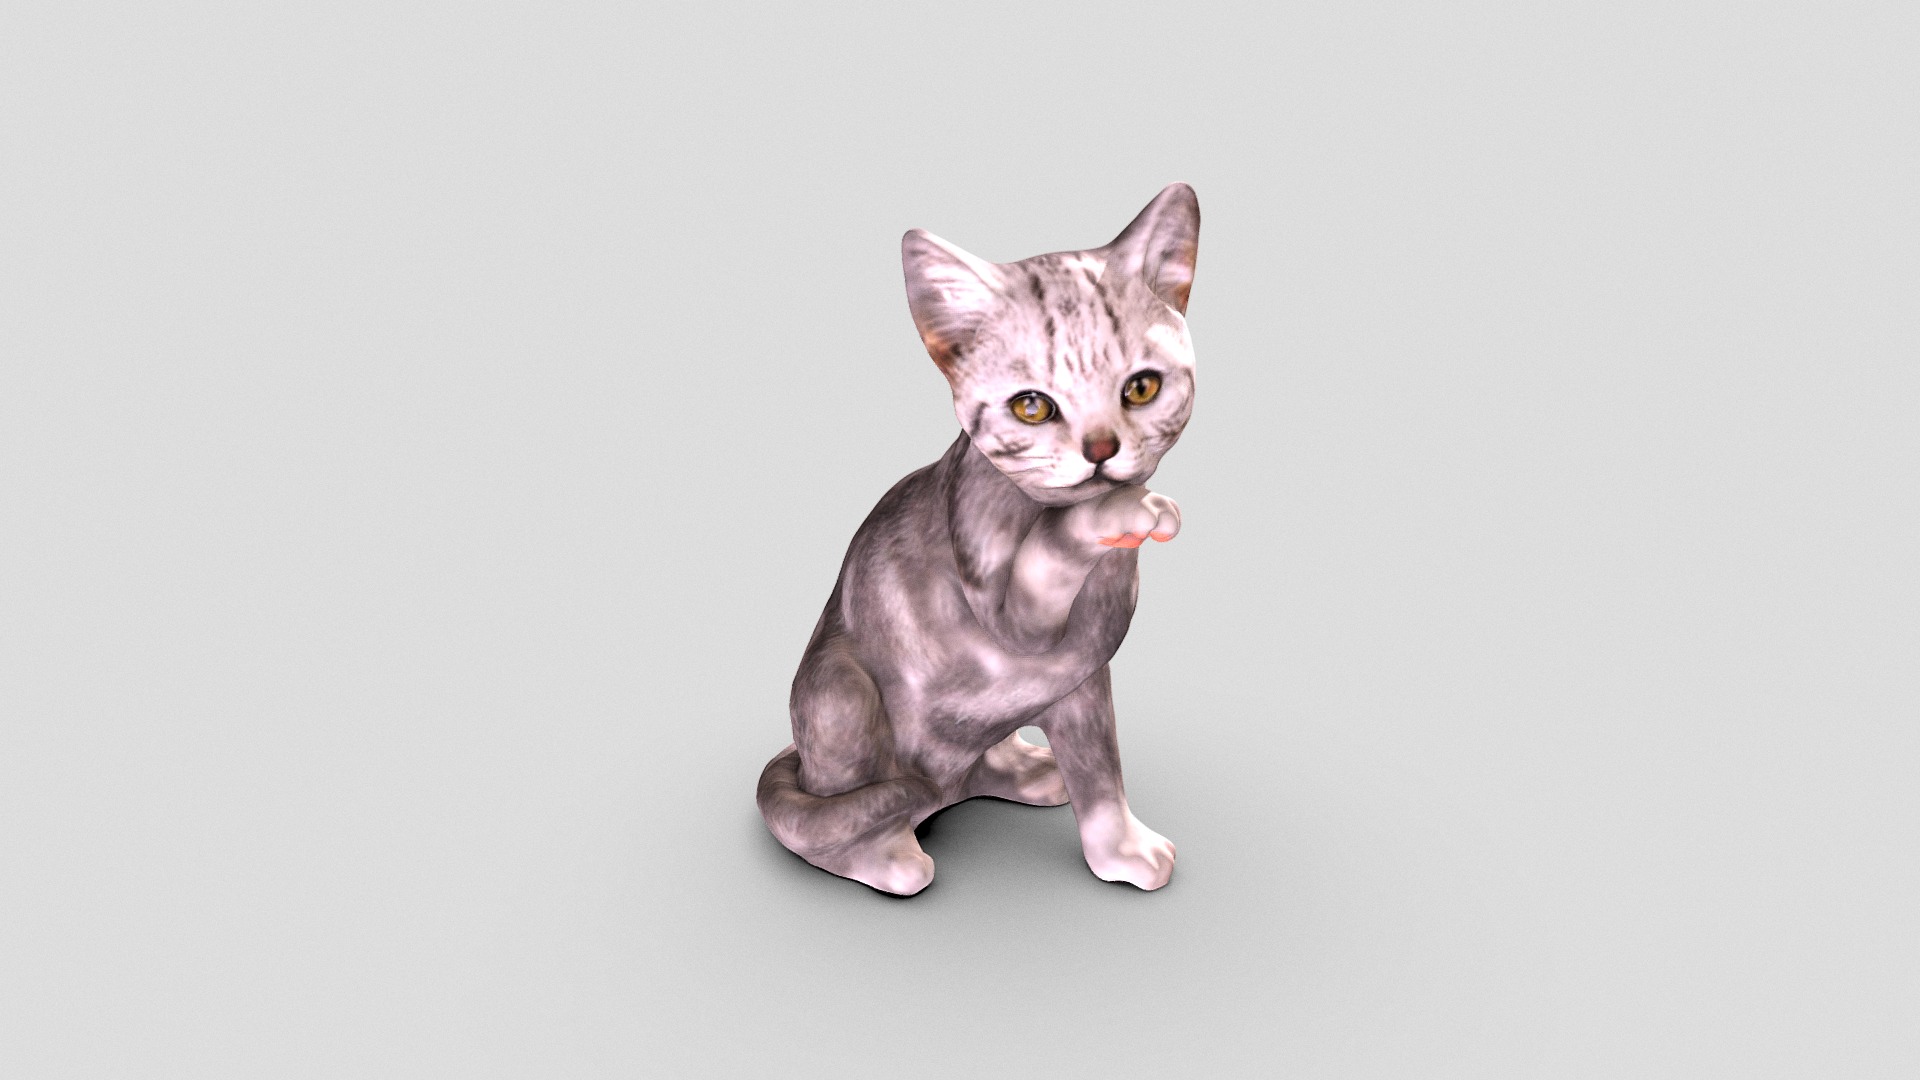 3D model Cat-model - This is a 3D model of the Cat-model. The 3D model is about a cat sitting on a white surface.